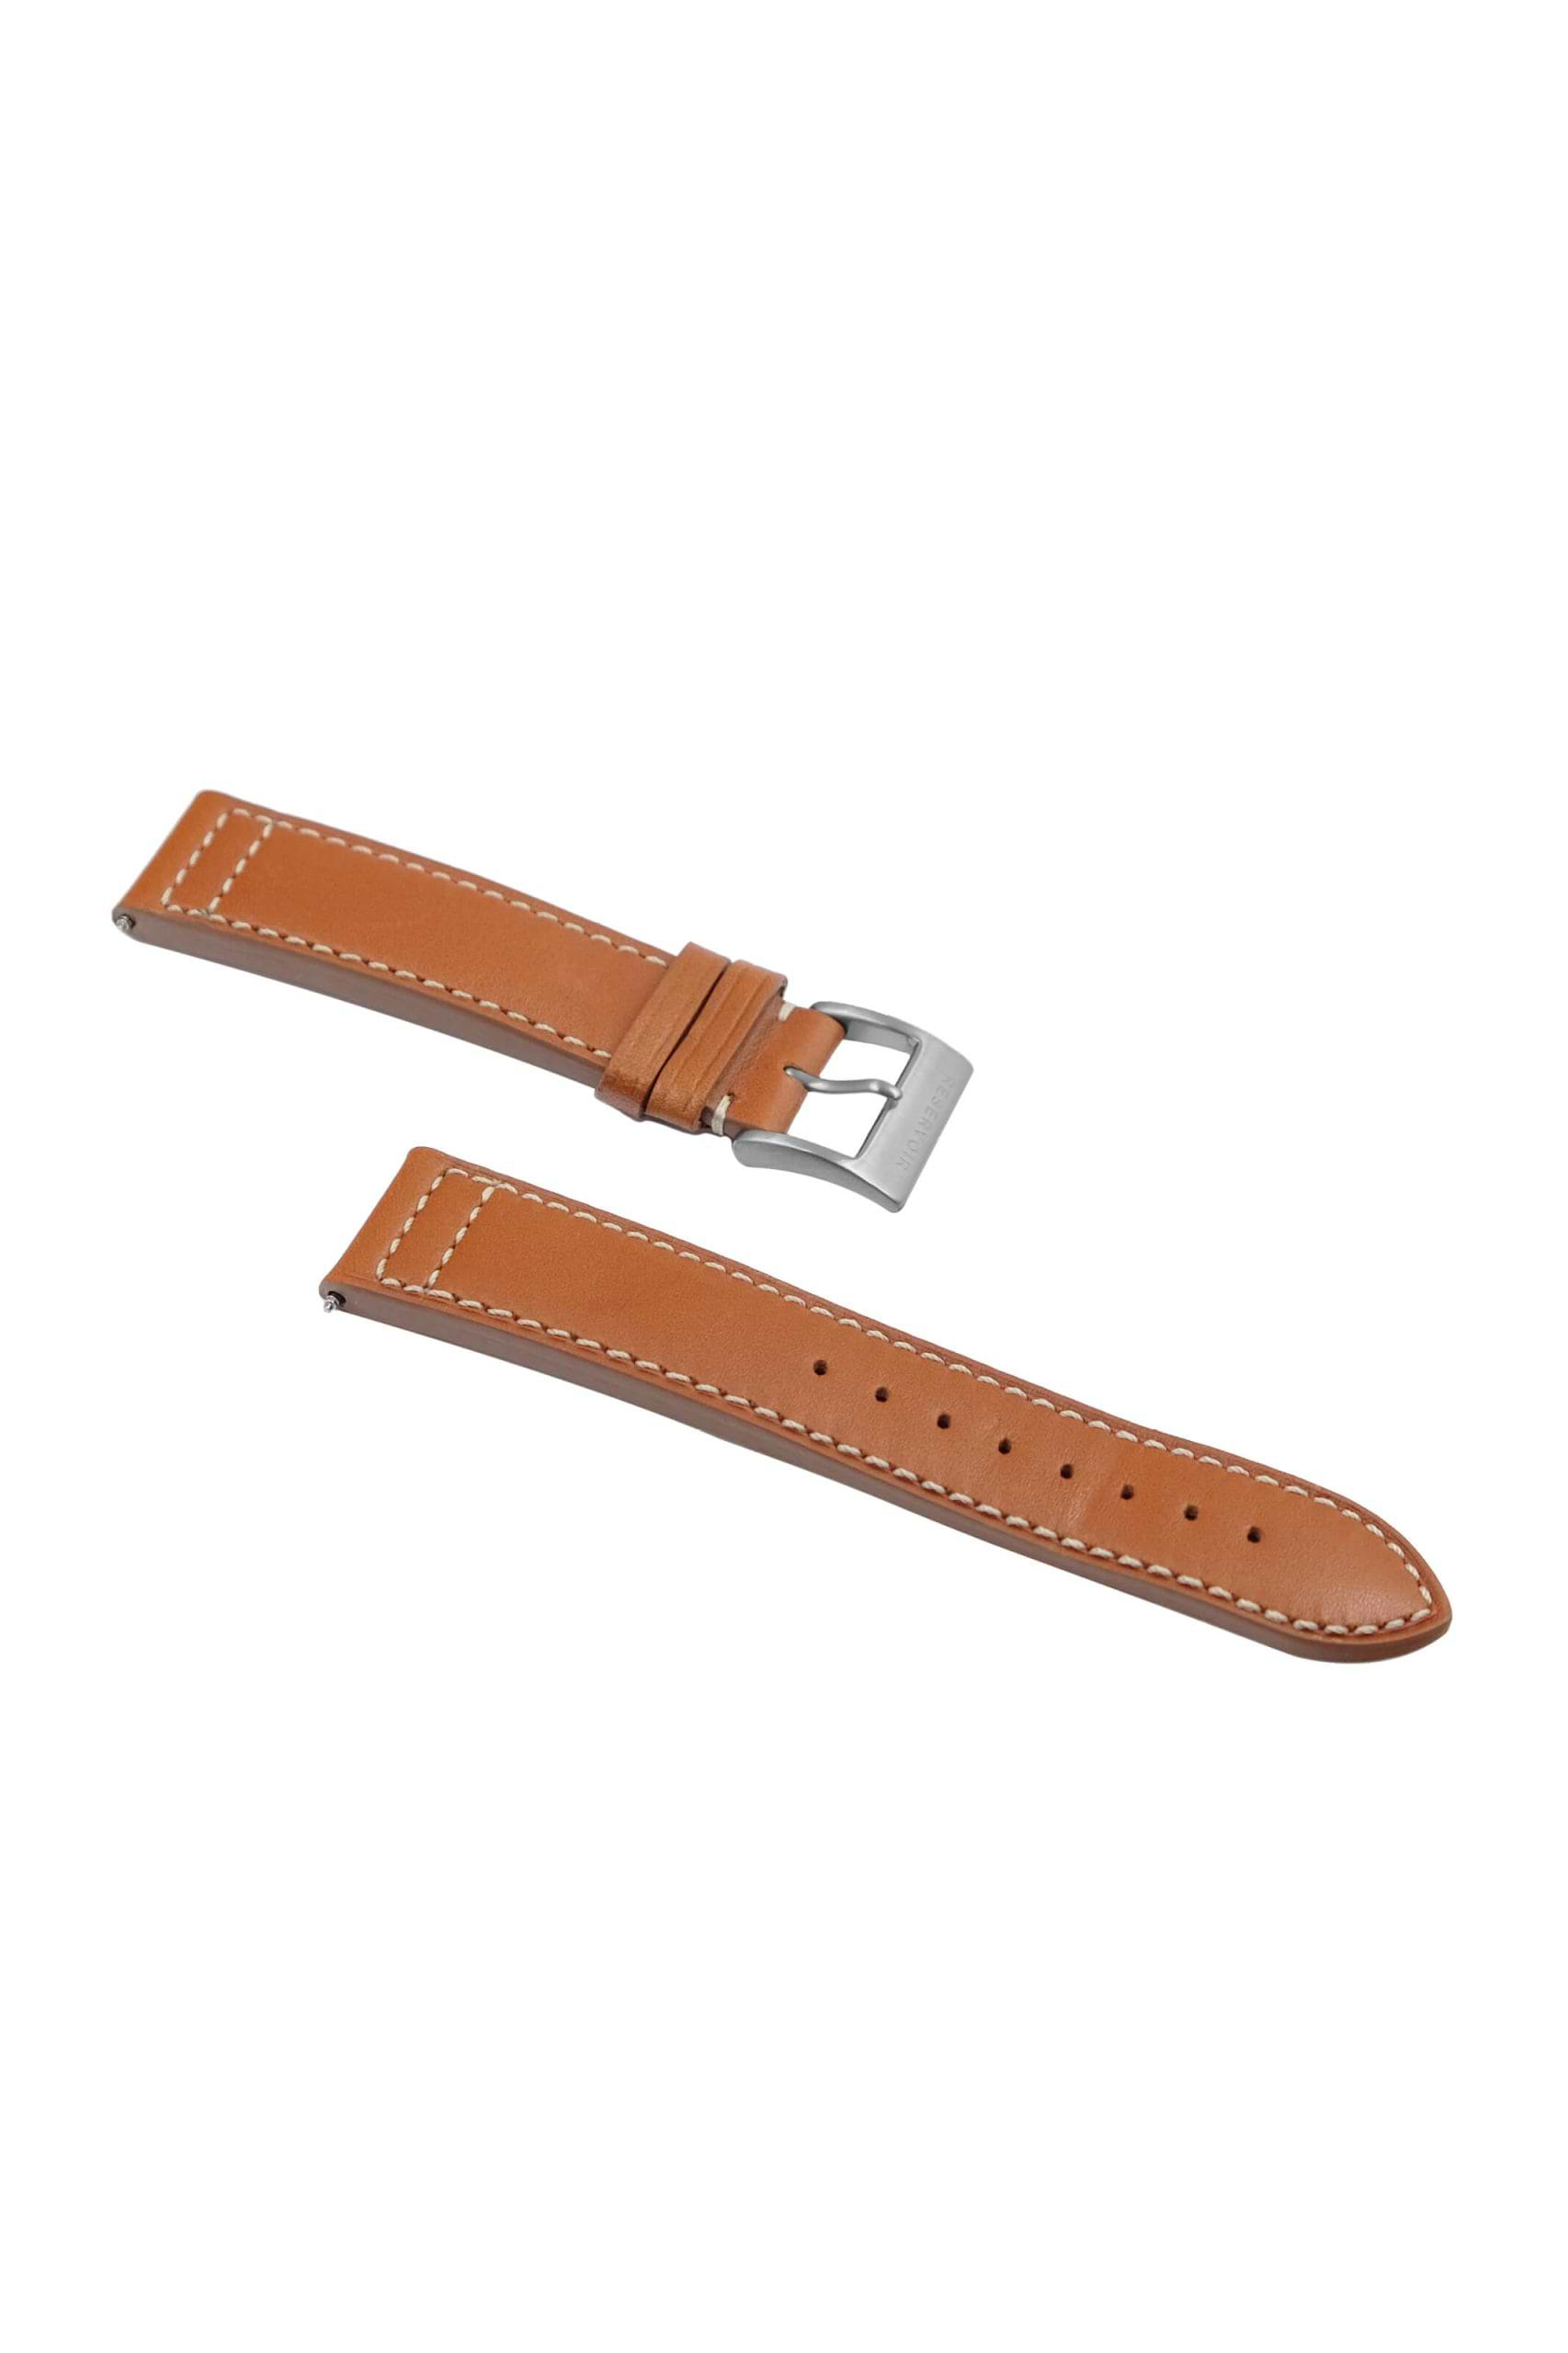 Leather strap WW1 biplane watch with light brown, pink, and grey colors.